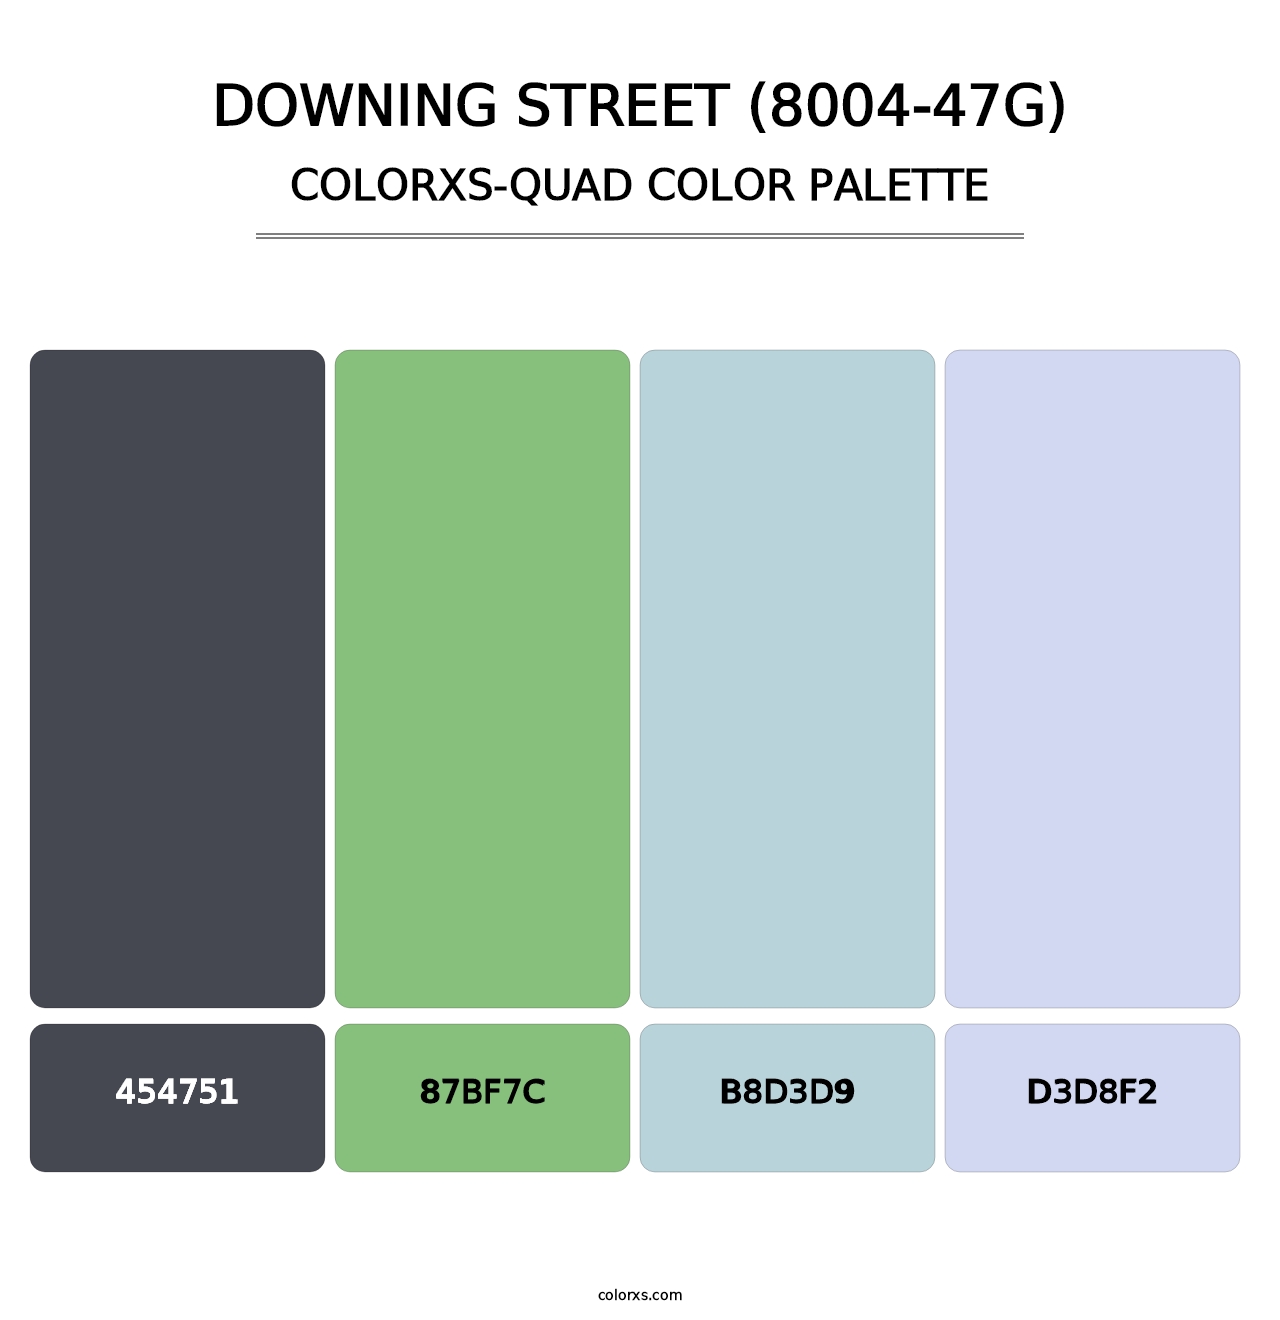 Downing Street (8004-47G) - Colorxs Quad Palette